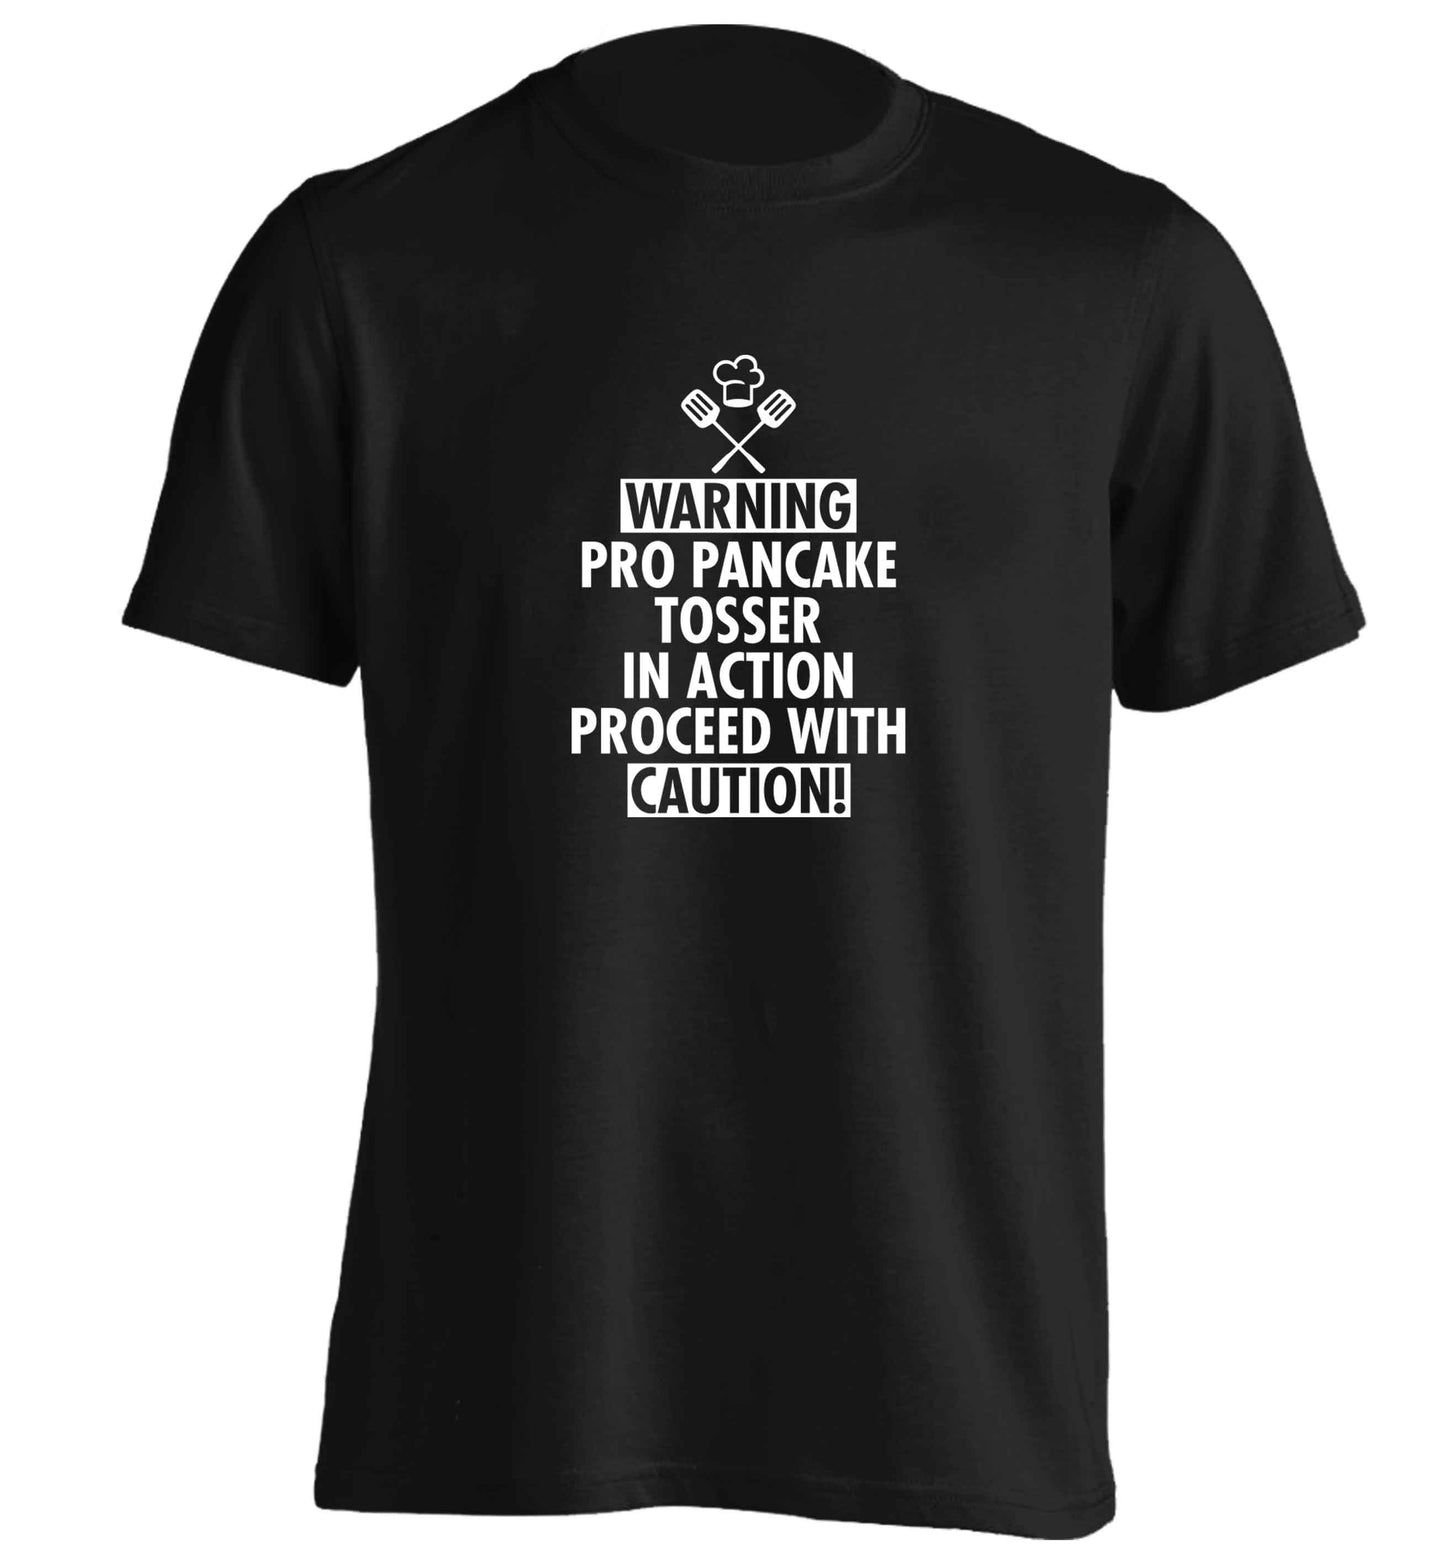 Warning pro pancake tosser in action proceed with caution adults unisex black Tshirt 2XL